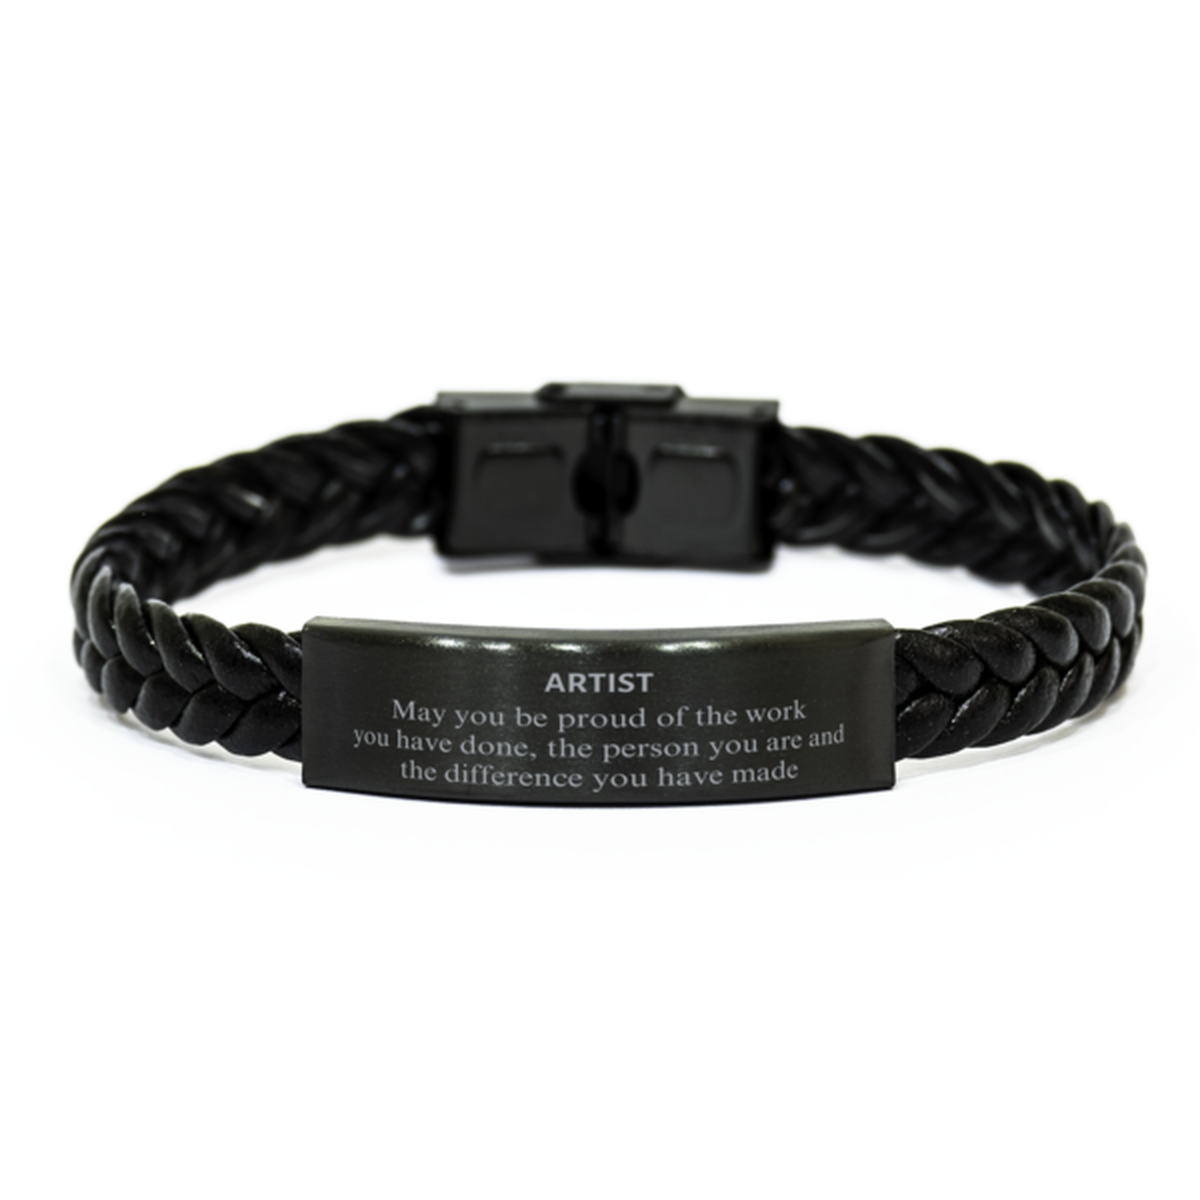 Artist May you be proud of the work you have done, Retirement Artist Braided Leather Bracelet for Colleague Appreciation Gifts Amazing for Artist